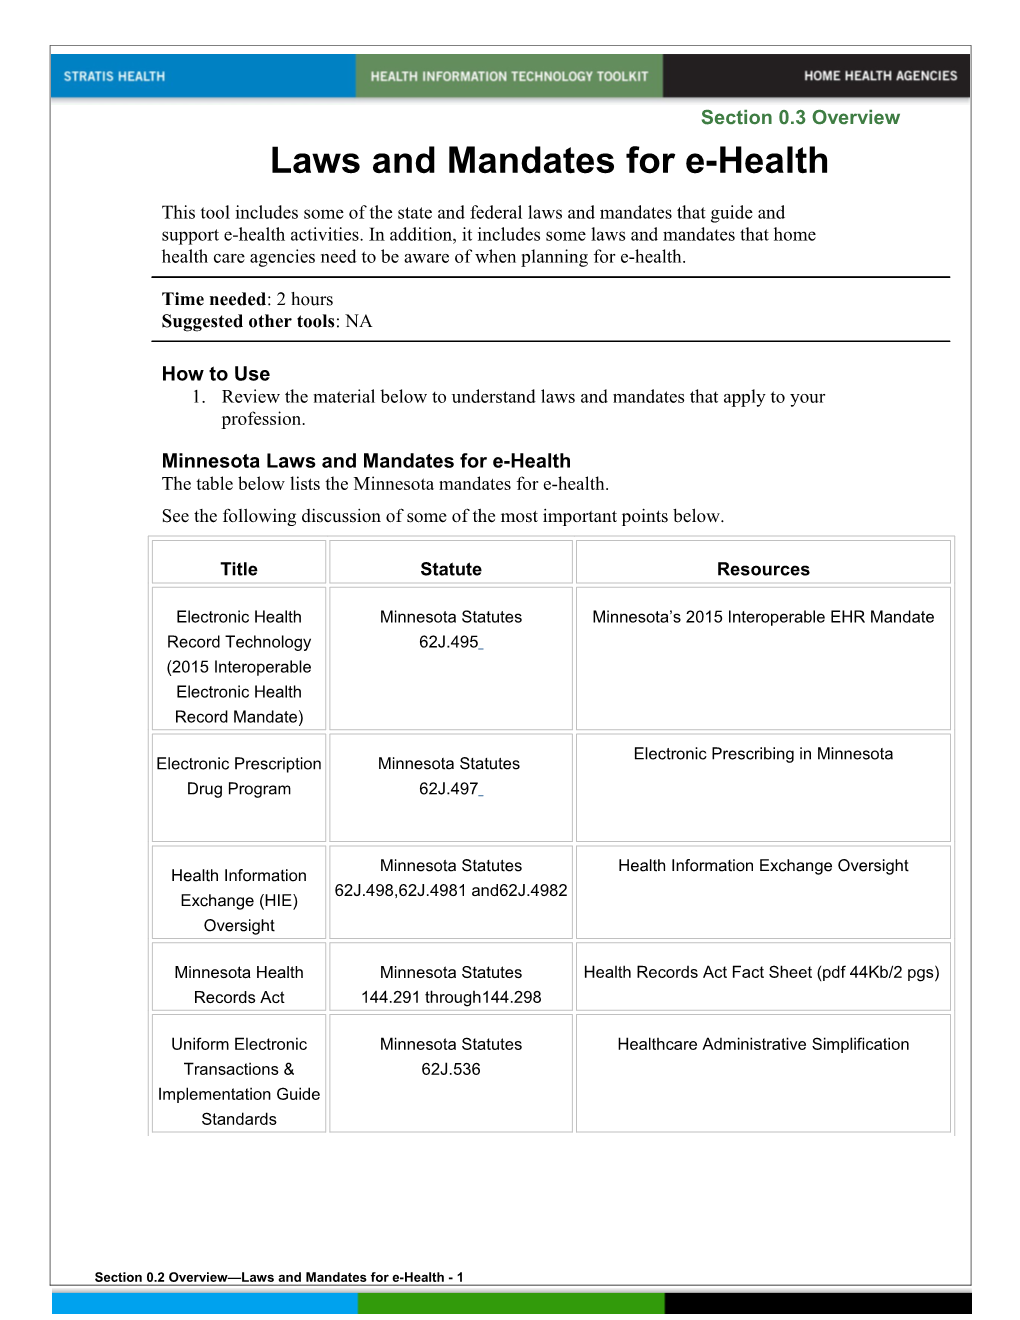 0 Laws and Mandates for E-Health